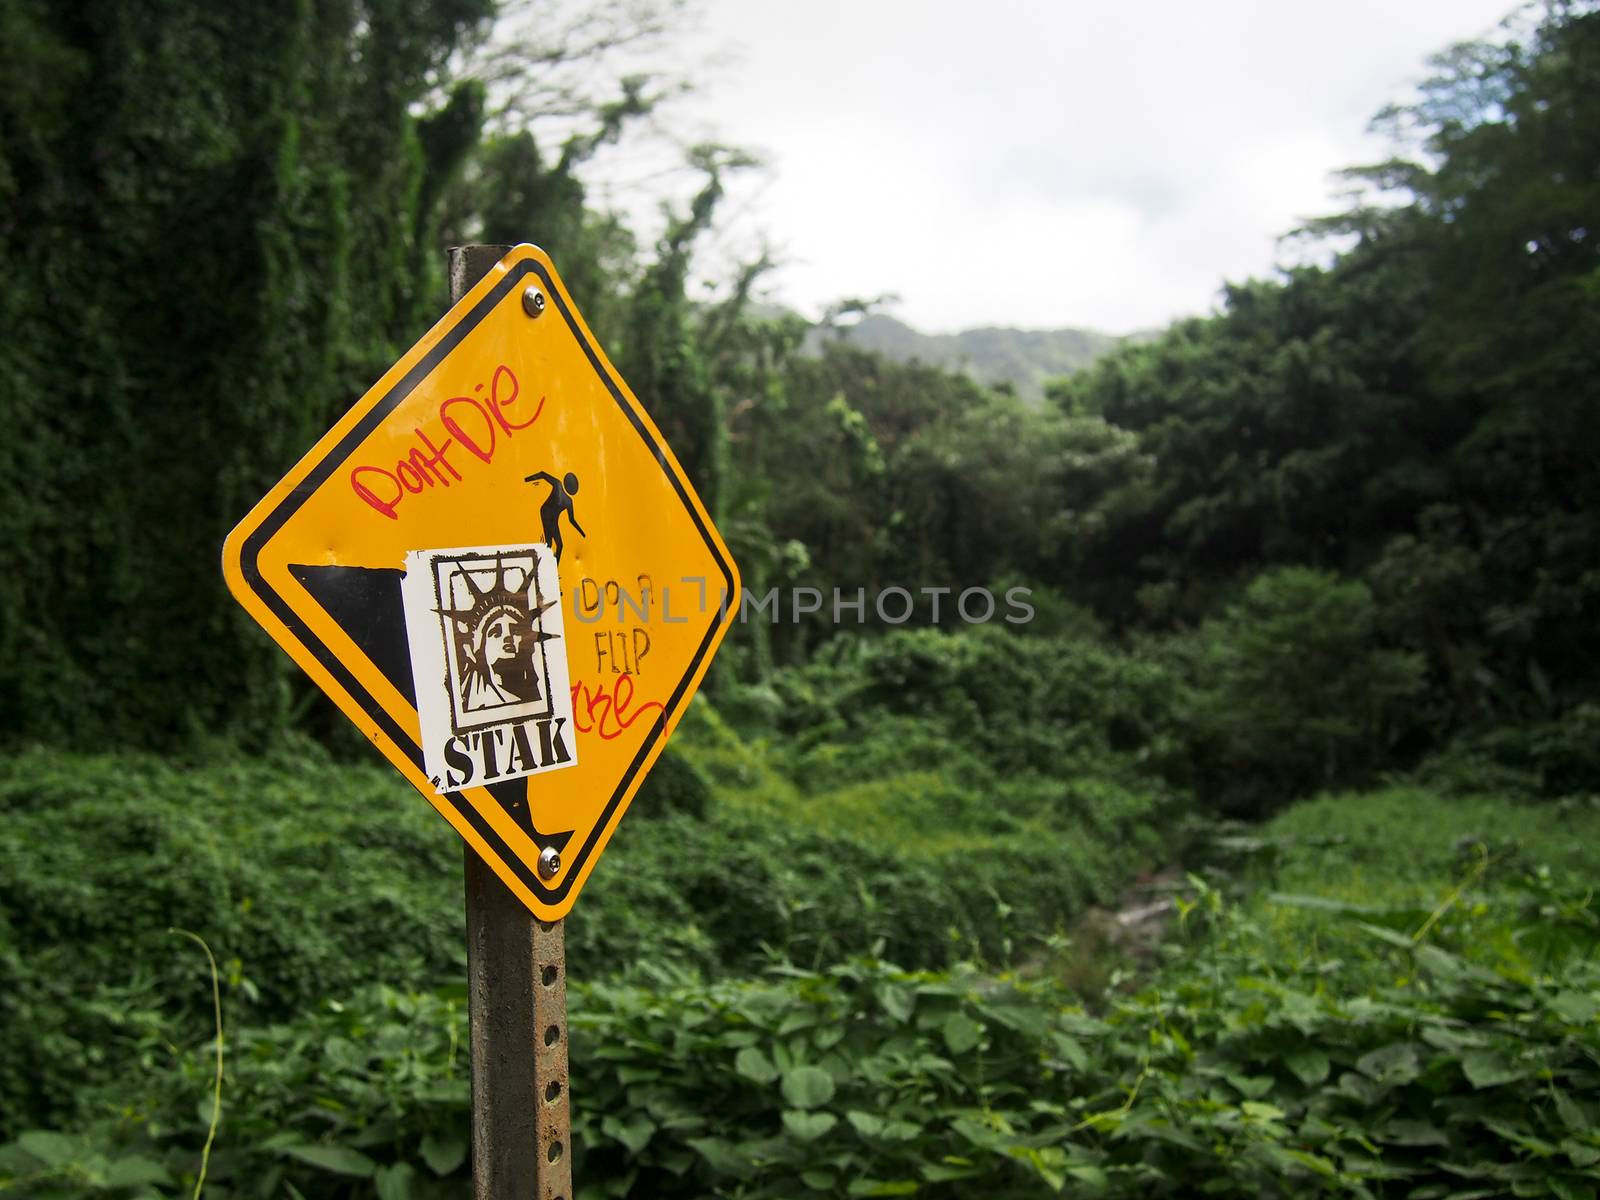 A warning sign along a hike on the island of Oahu in Hawaii has been defaced with graffiti.